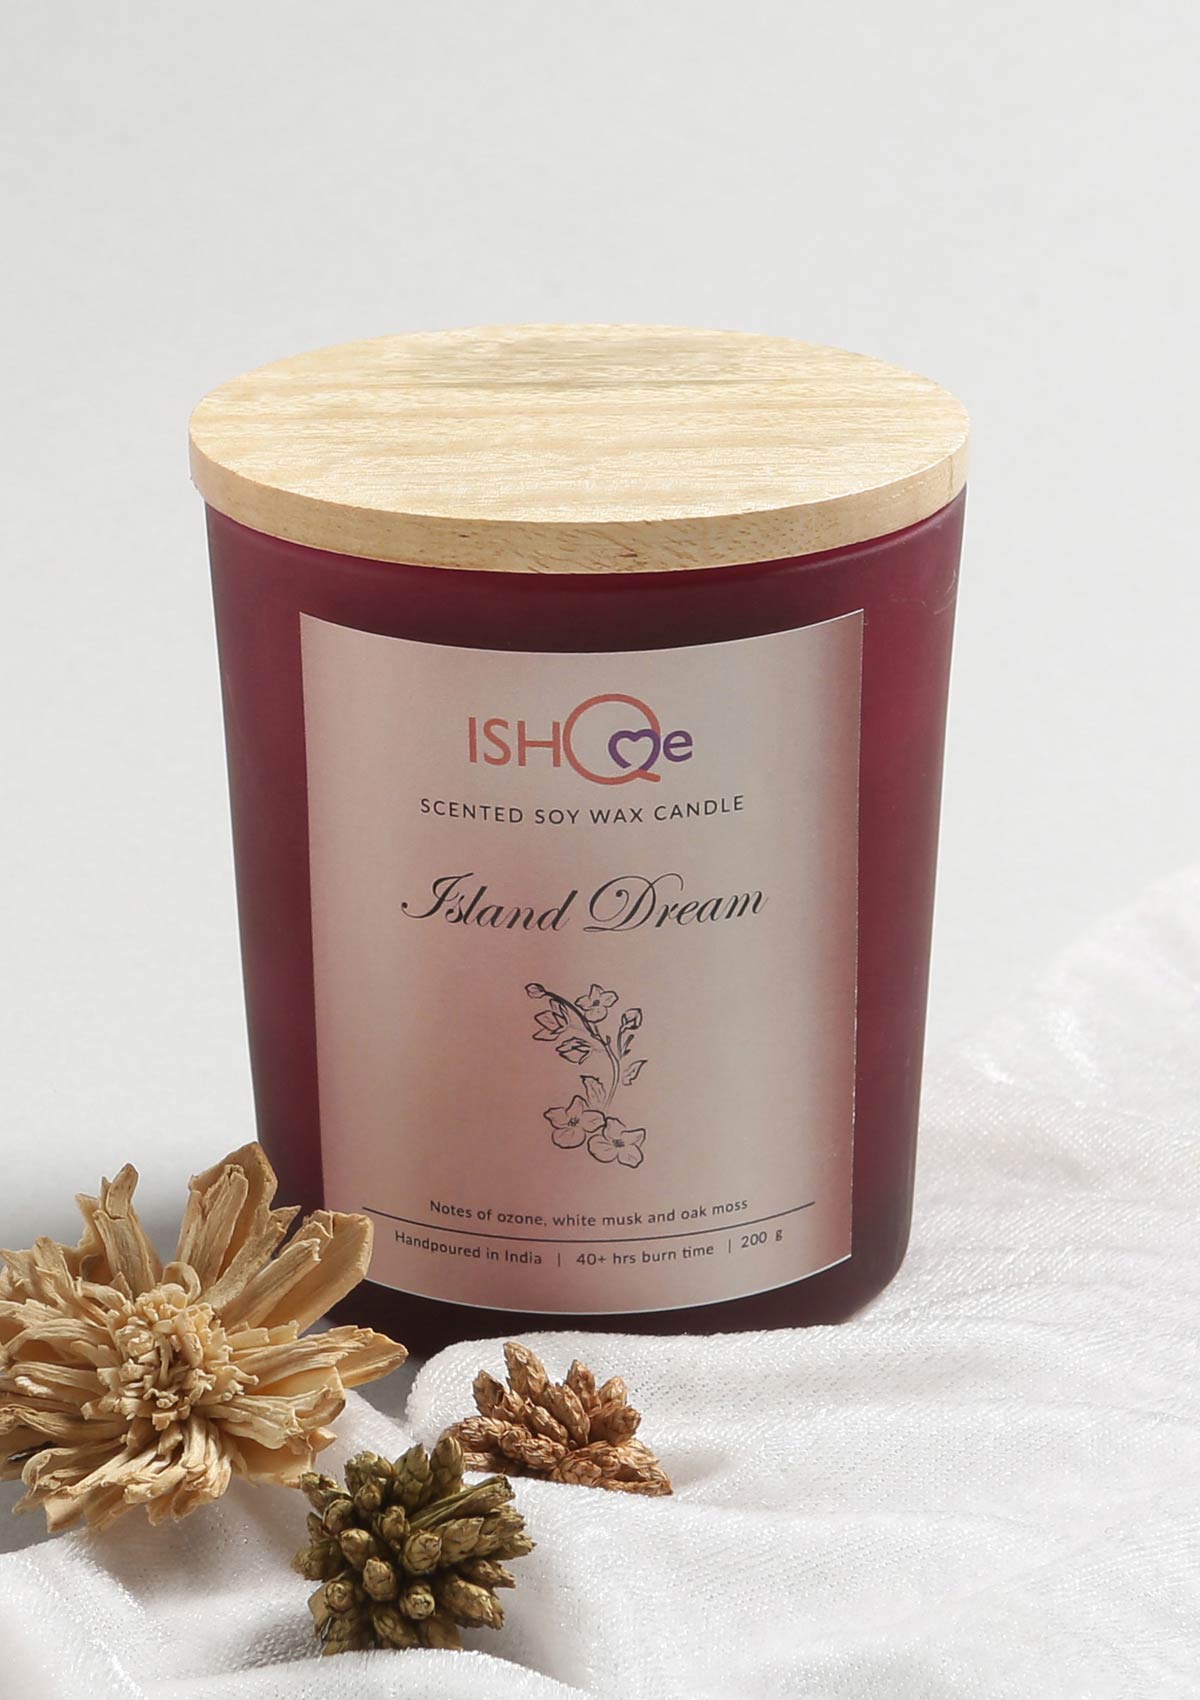 Scented Soy Wax Candle - Island Dream - IshqMe